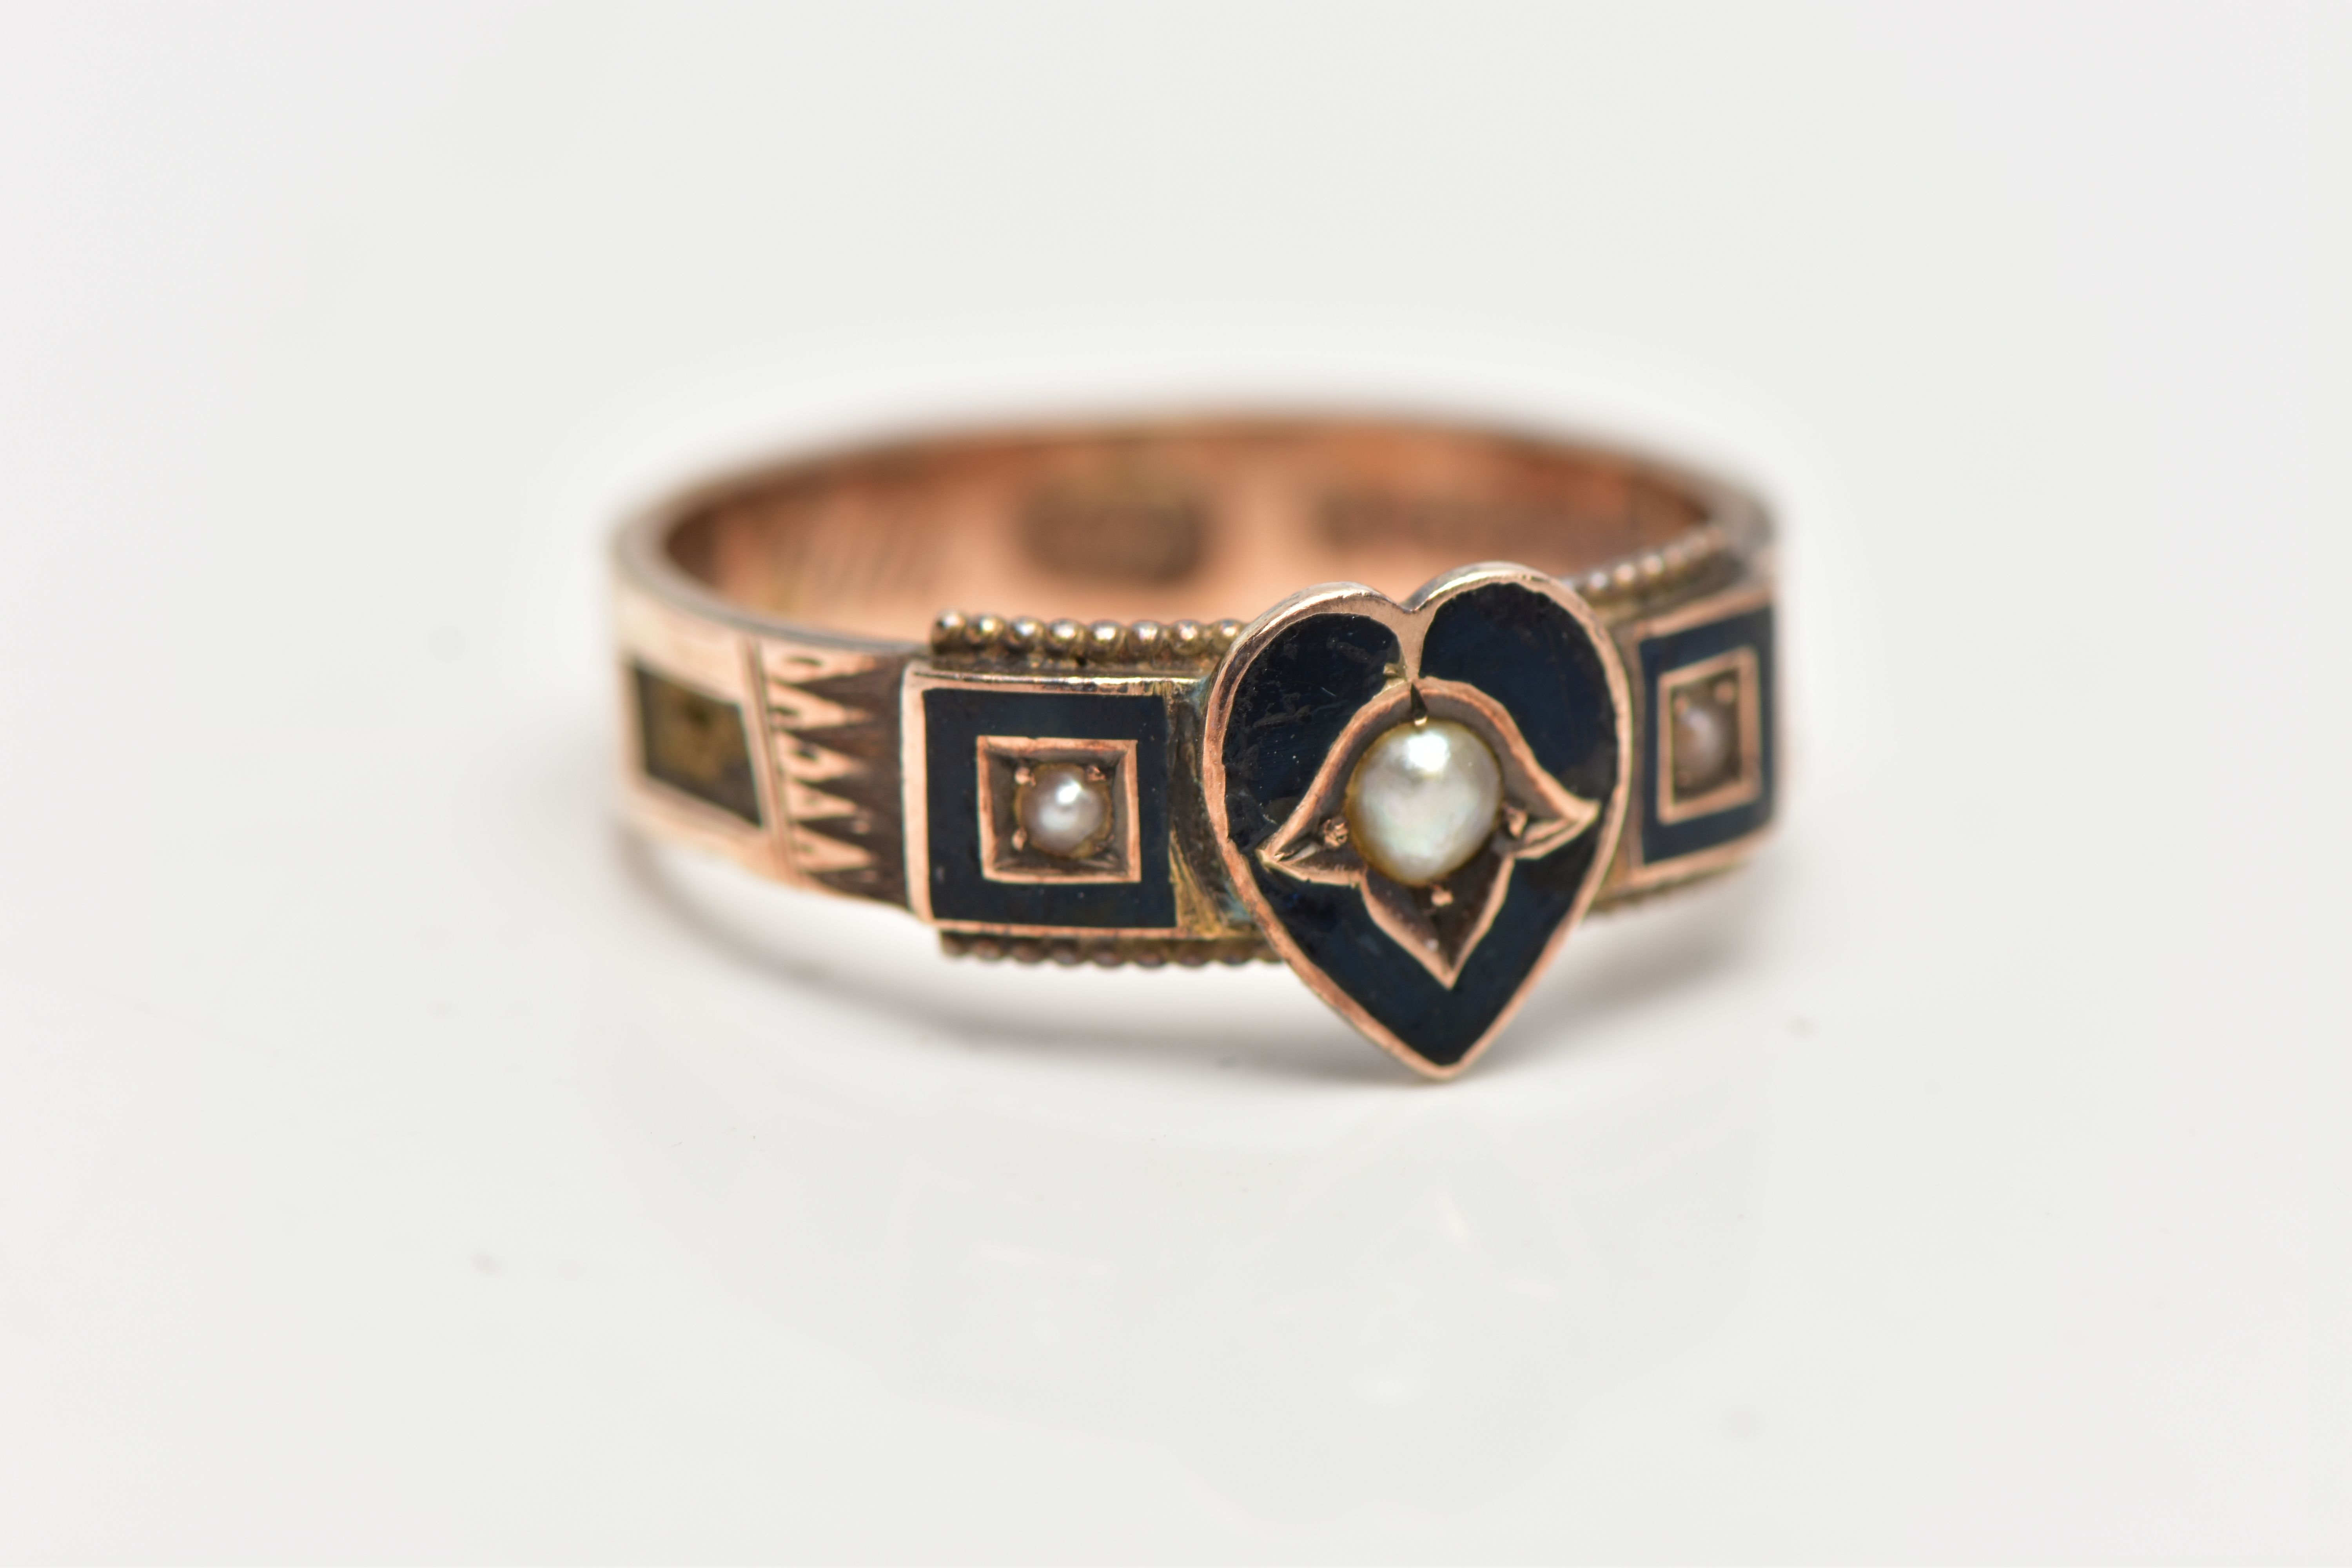 A CASED LATE VICTORIAN 9CT GOLD BLACK ENAMEL MOURNING RING, designed as a black enamel heart with - Image 8 of 9